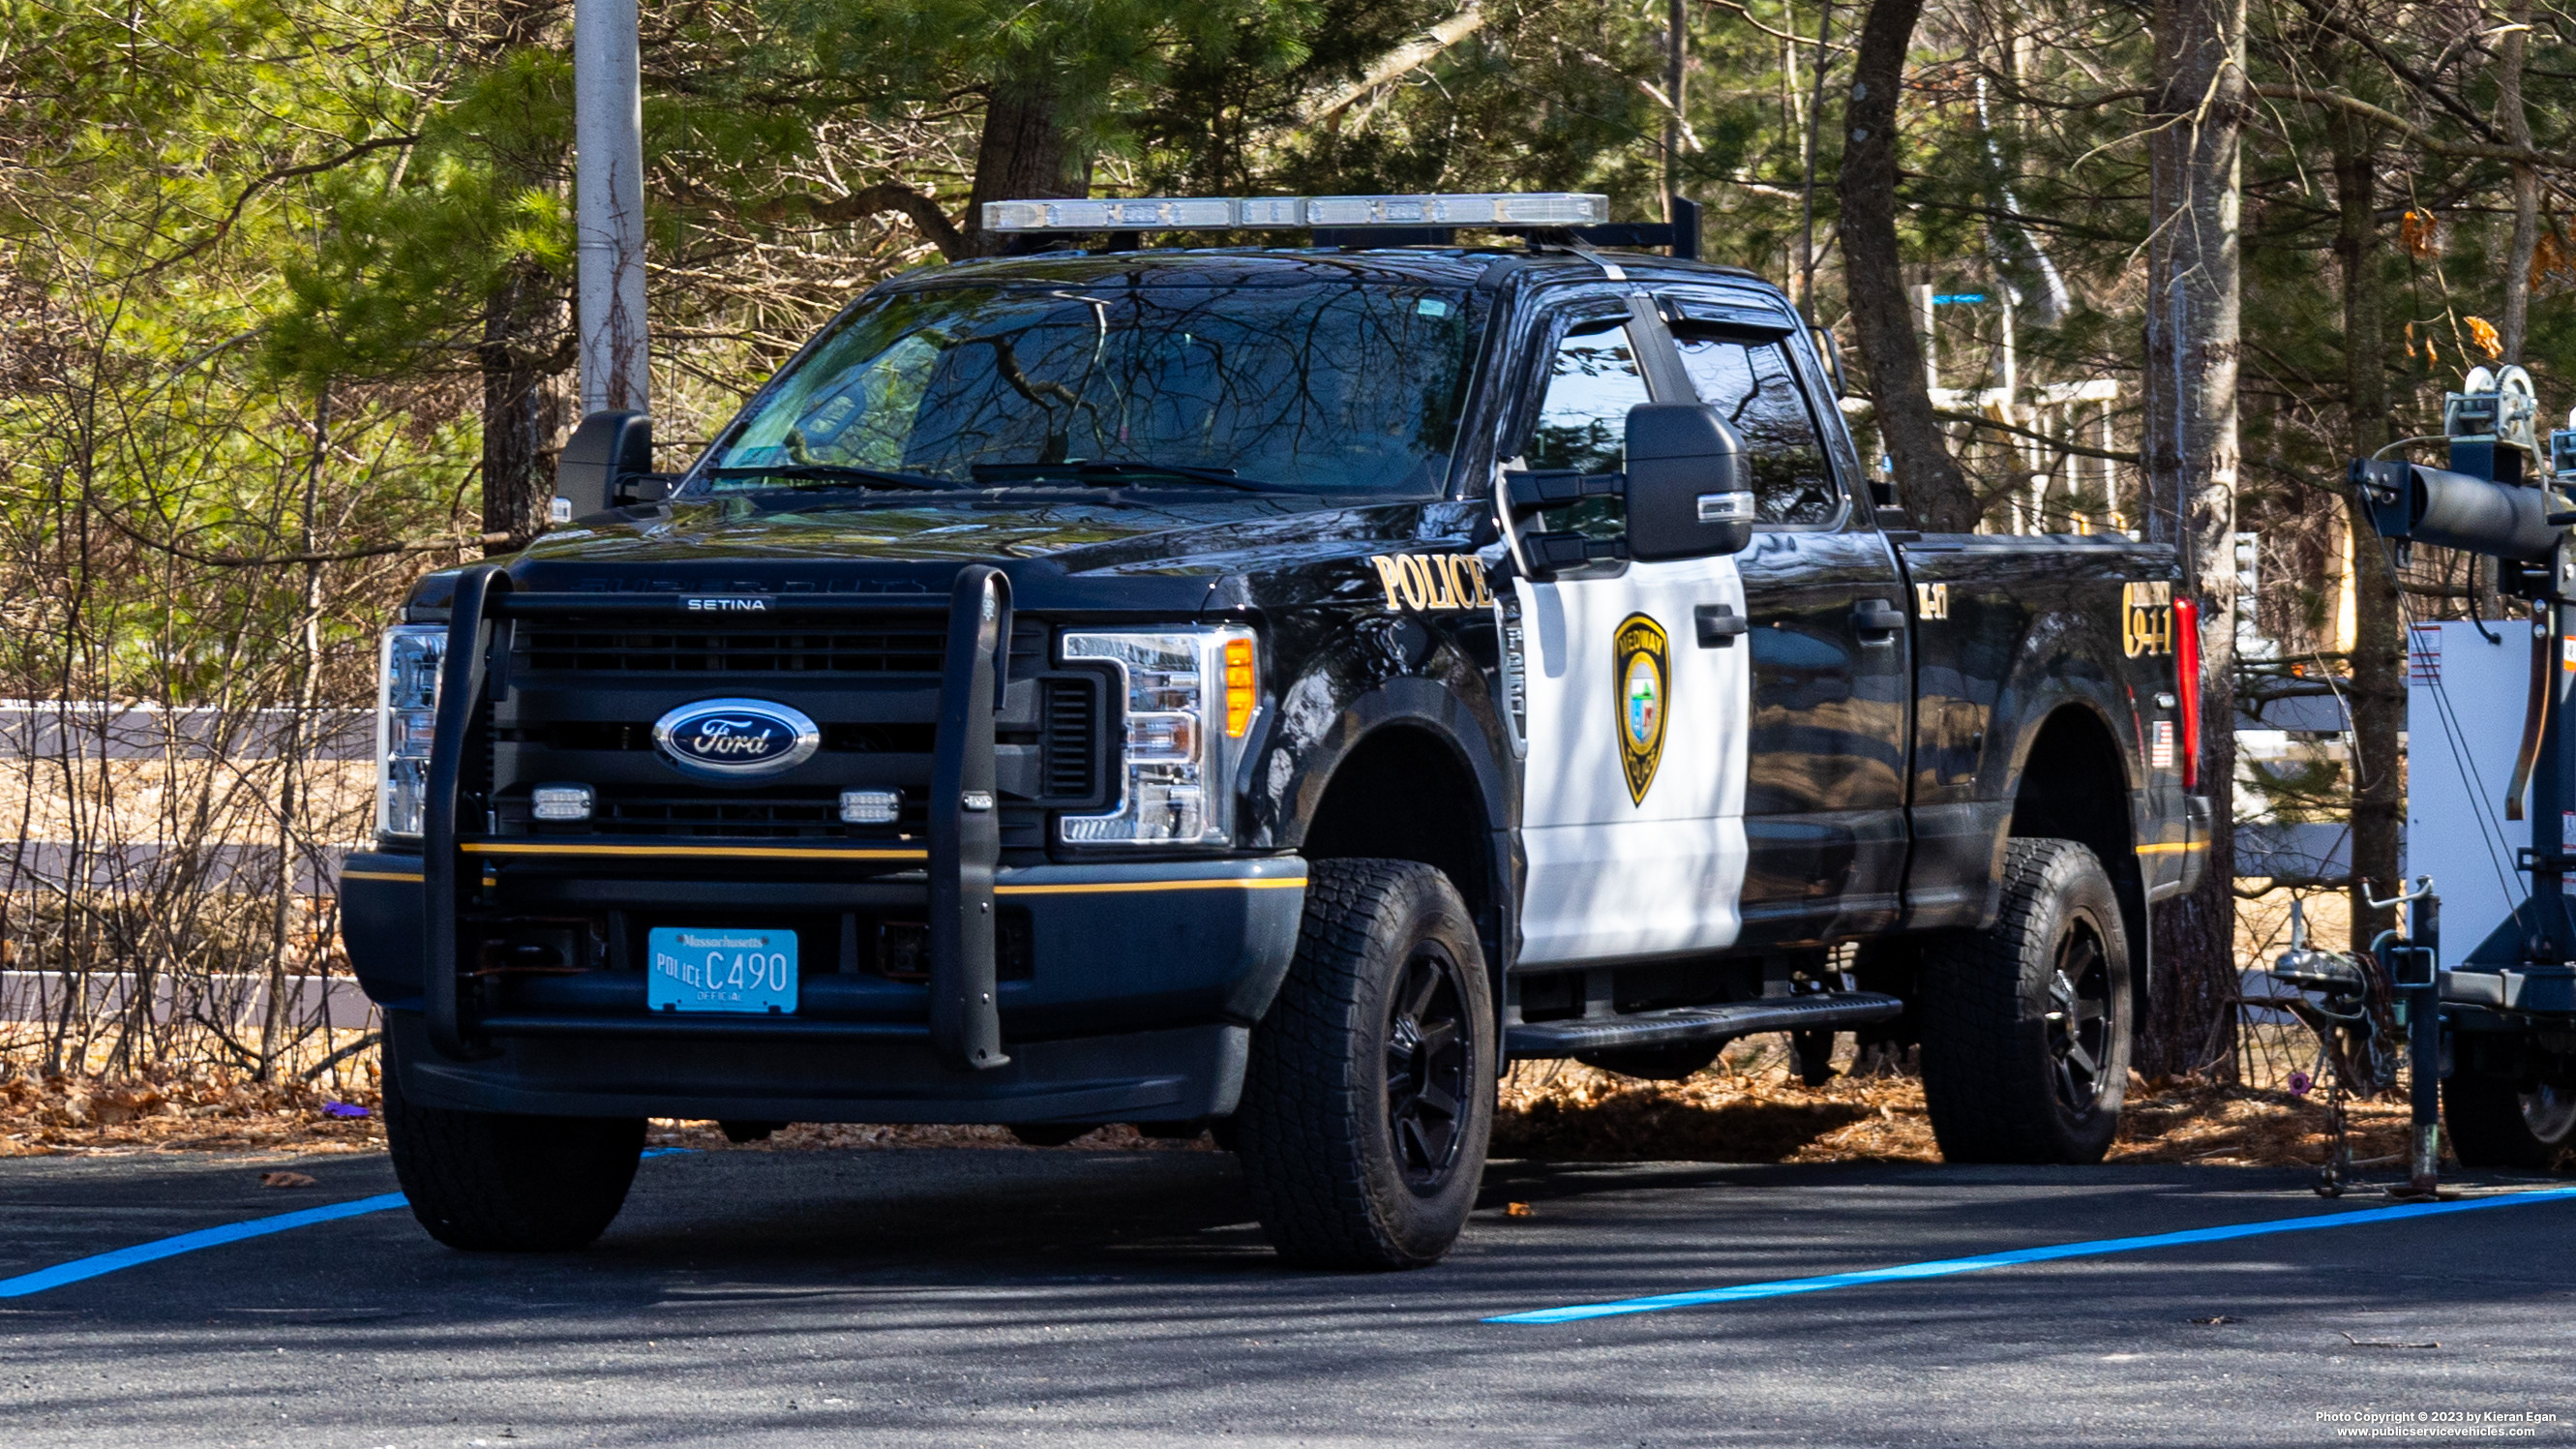 A photo  of Medway Police
            Cruiser K-17, a 2017 Ford F-250 Crew Cab             taken by Kieran Egan